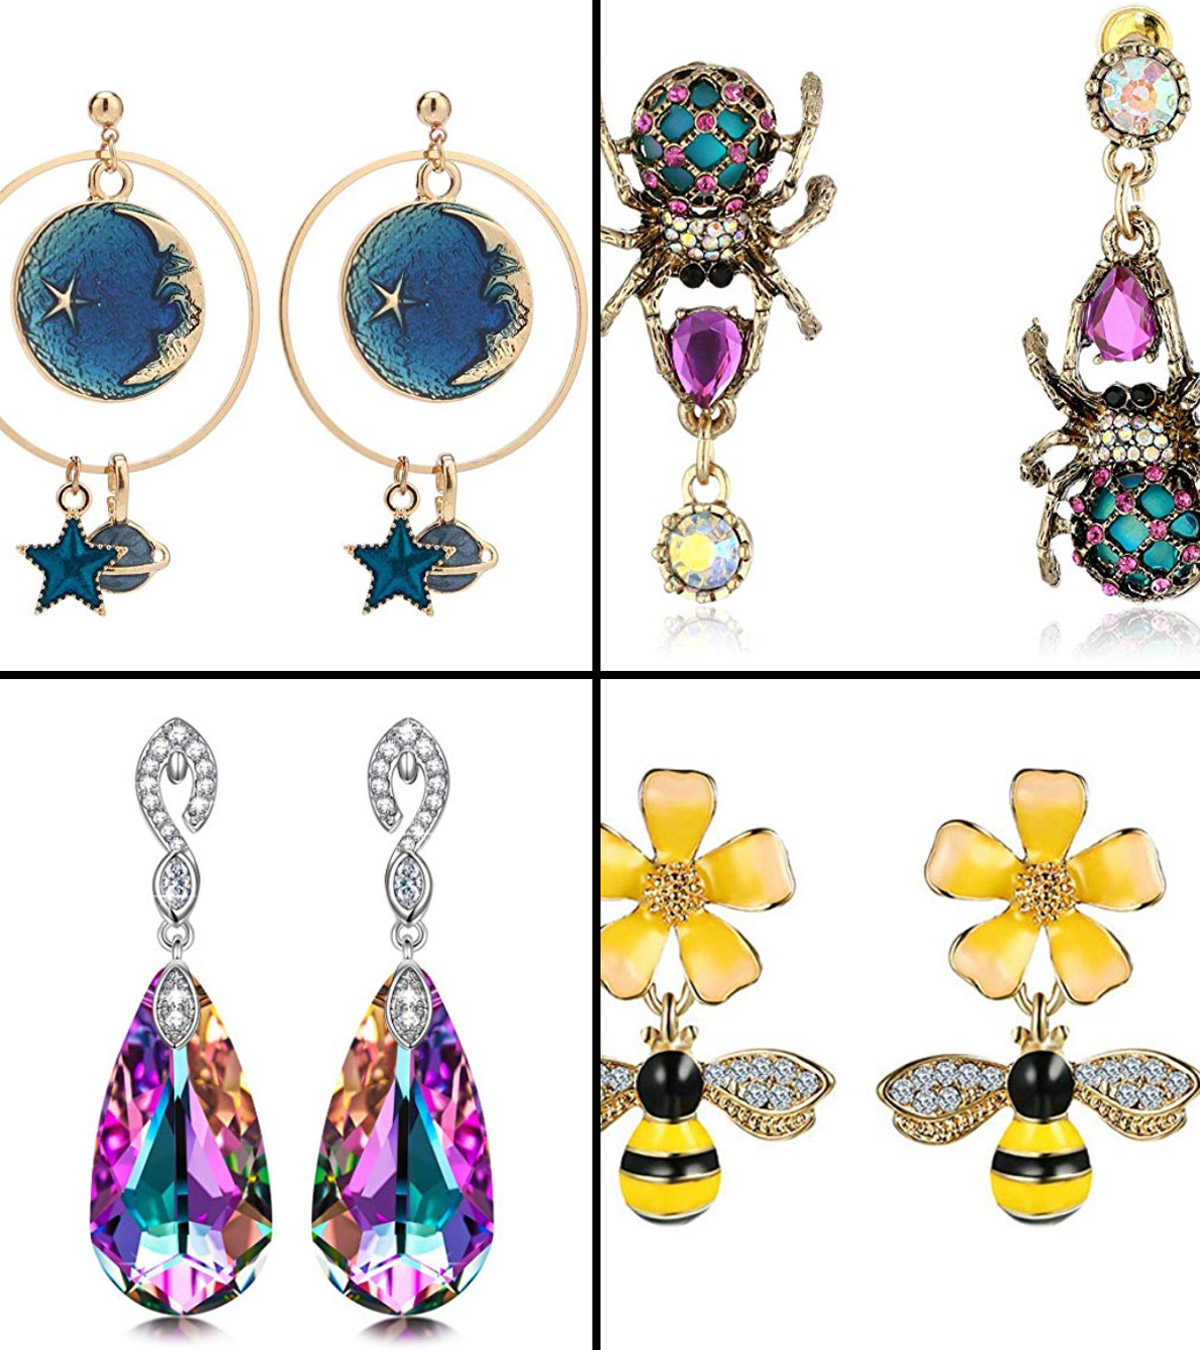 9 Types Of Earrings MustHave For Ever Woman  Types of earrings Fancy  jewelry Online earrings